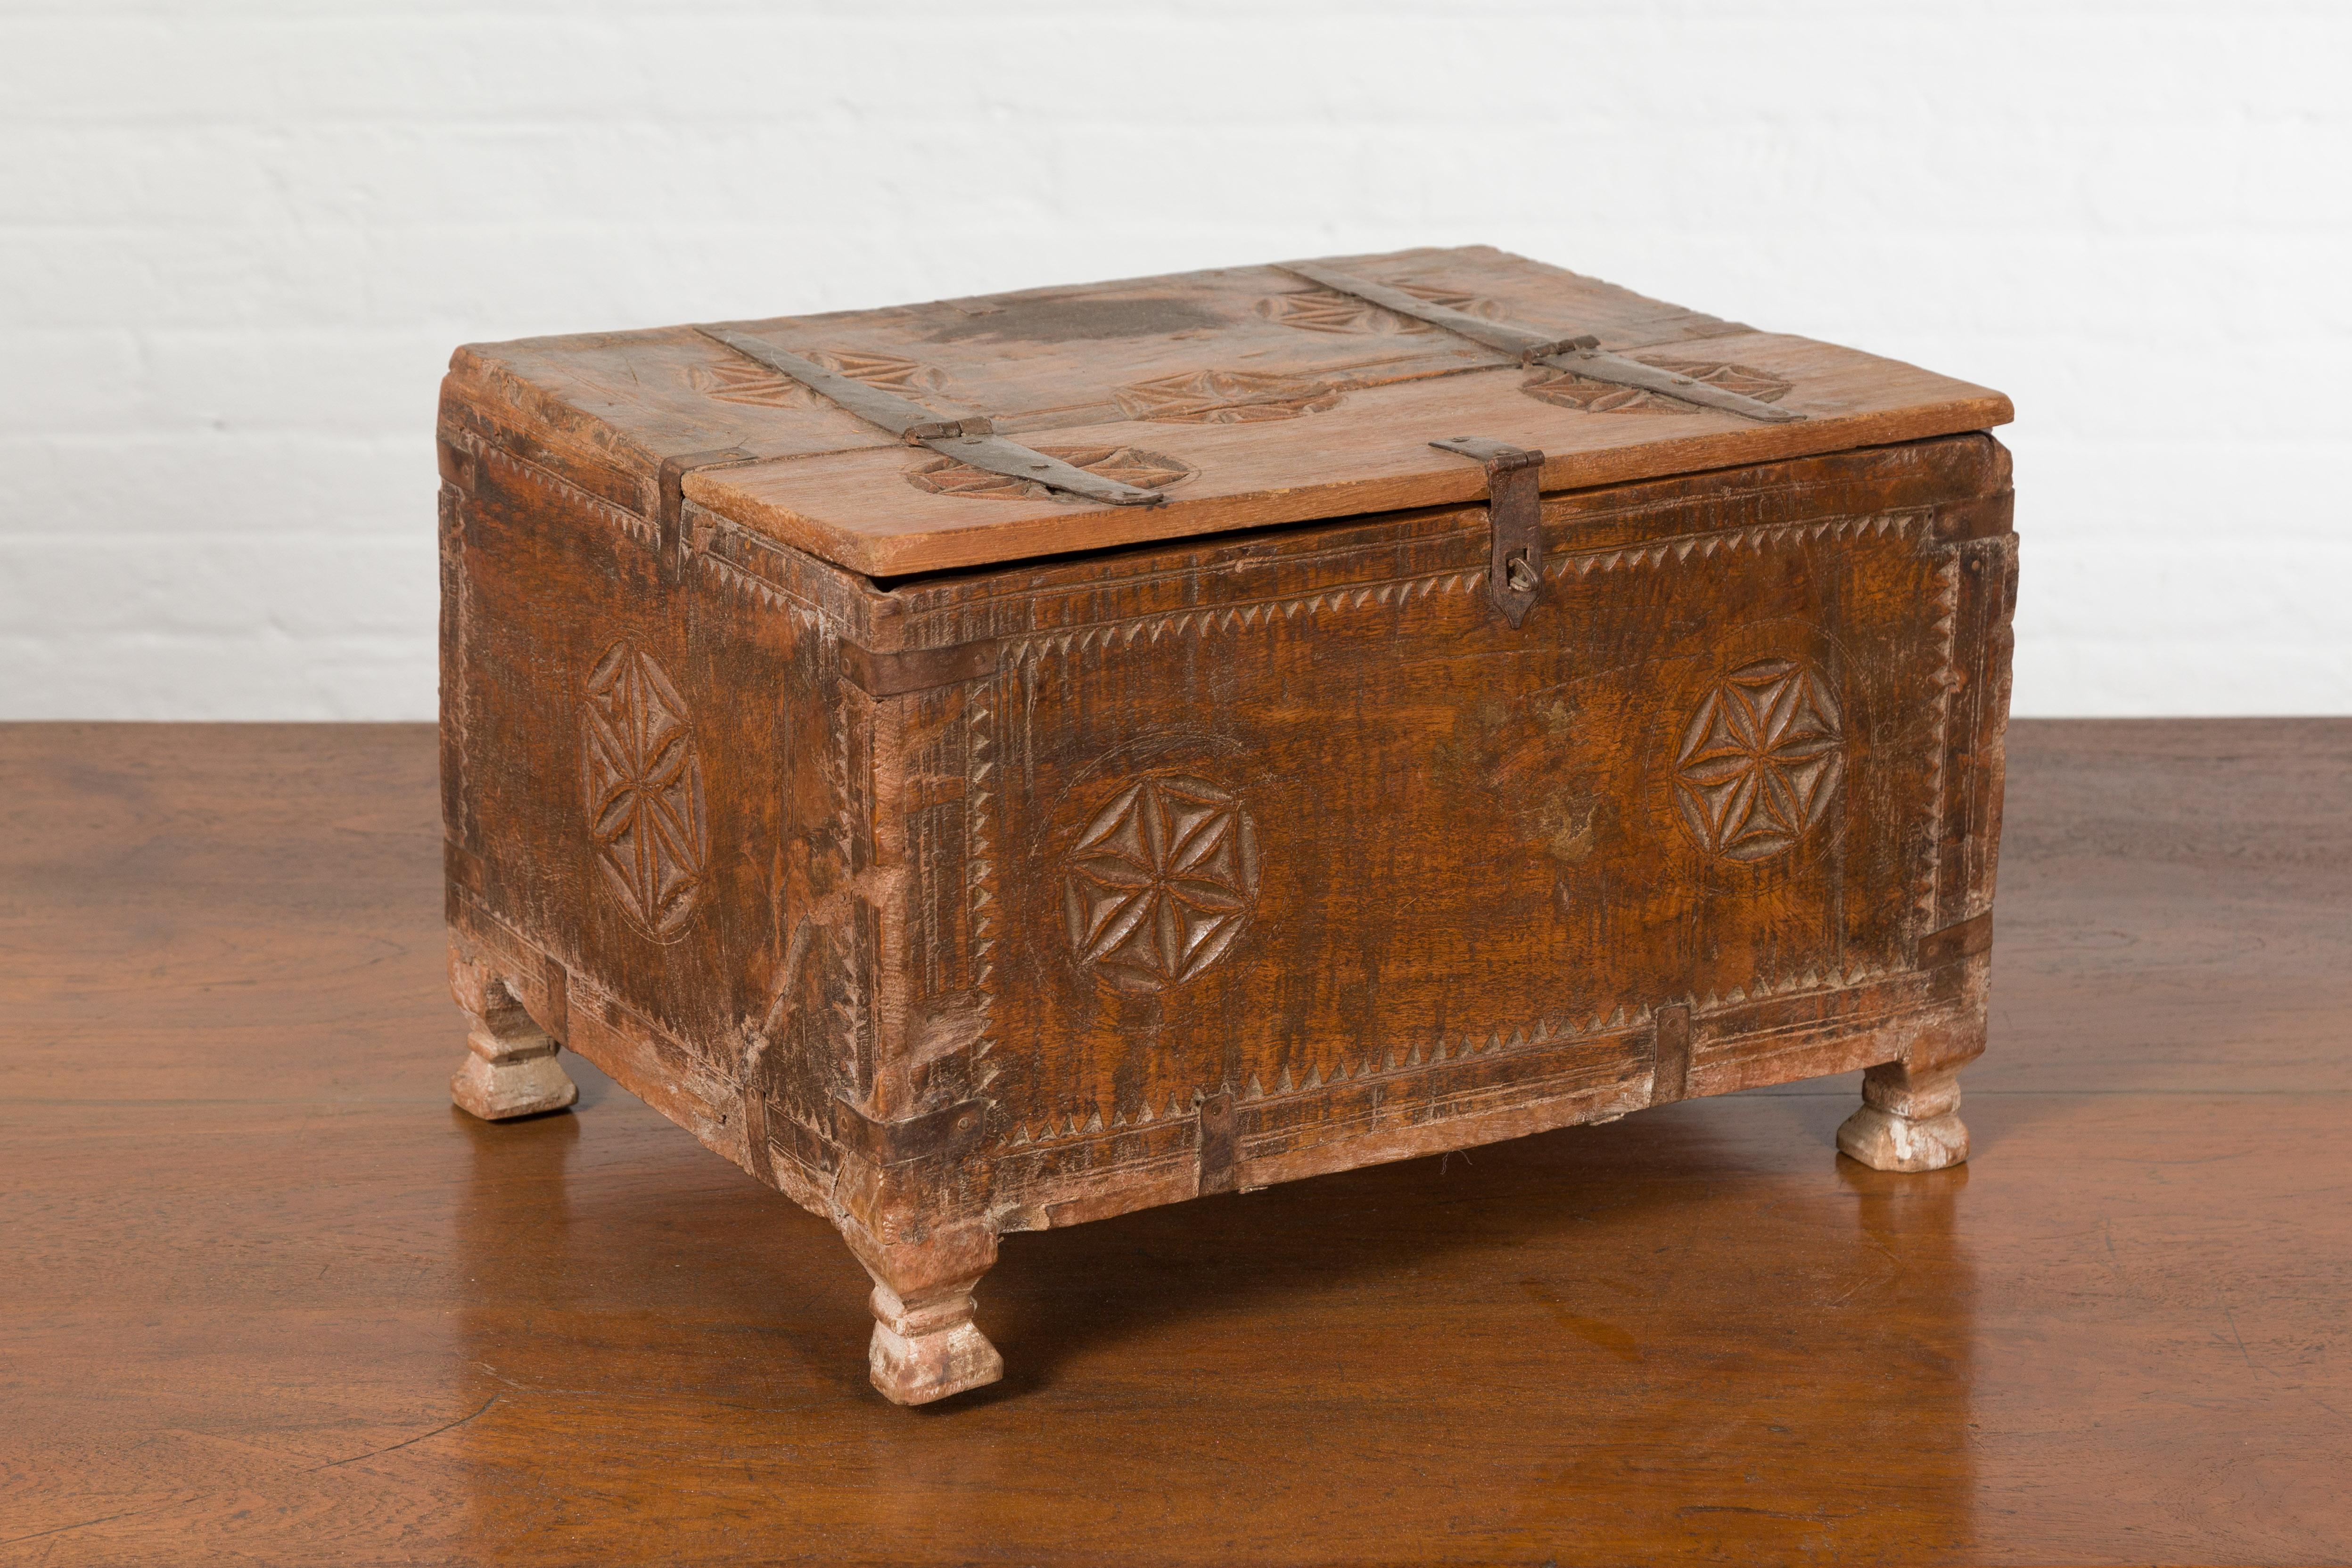 Indian 19th Century Small Wooden Box with Iron Hardware and Carved Rosacea For Sale 6